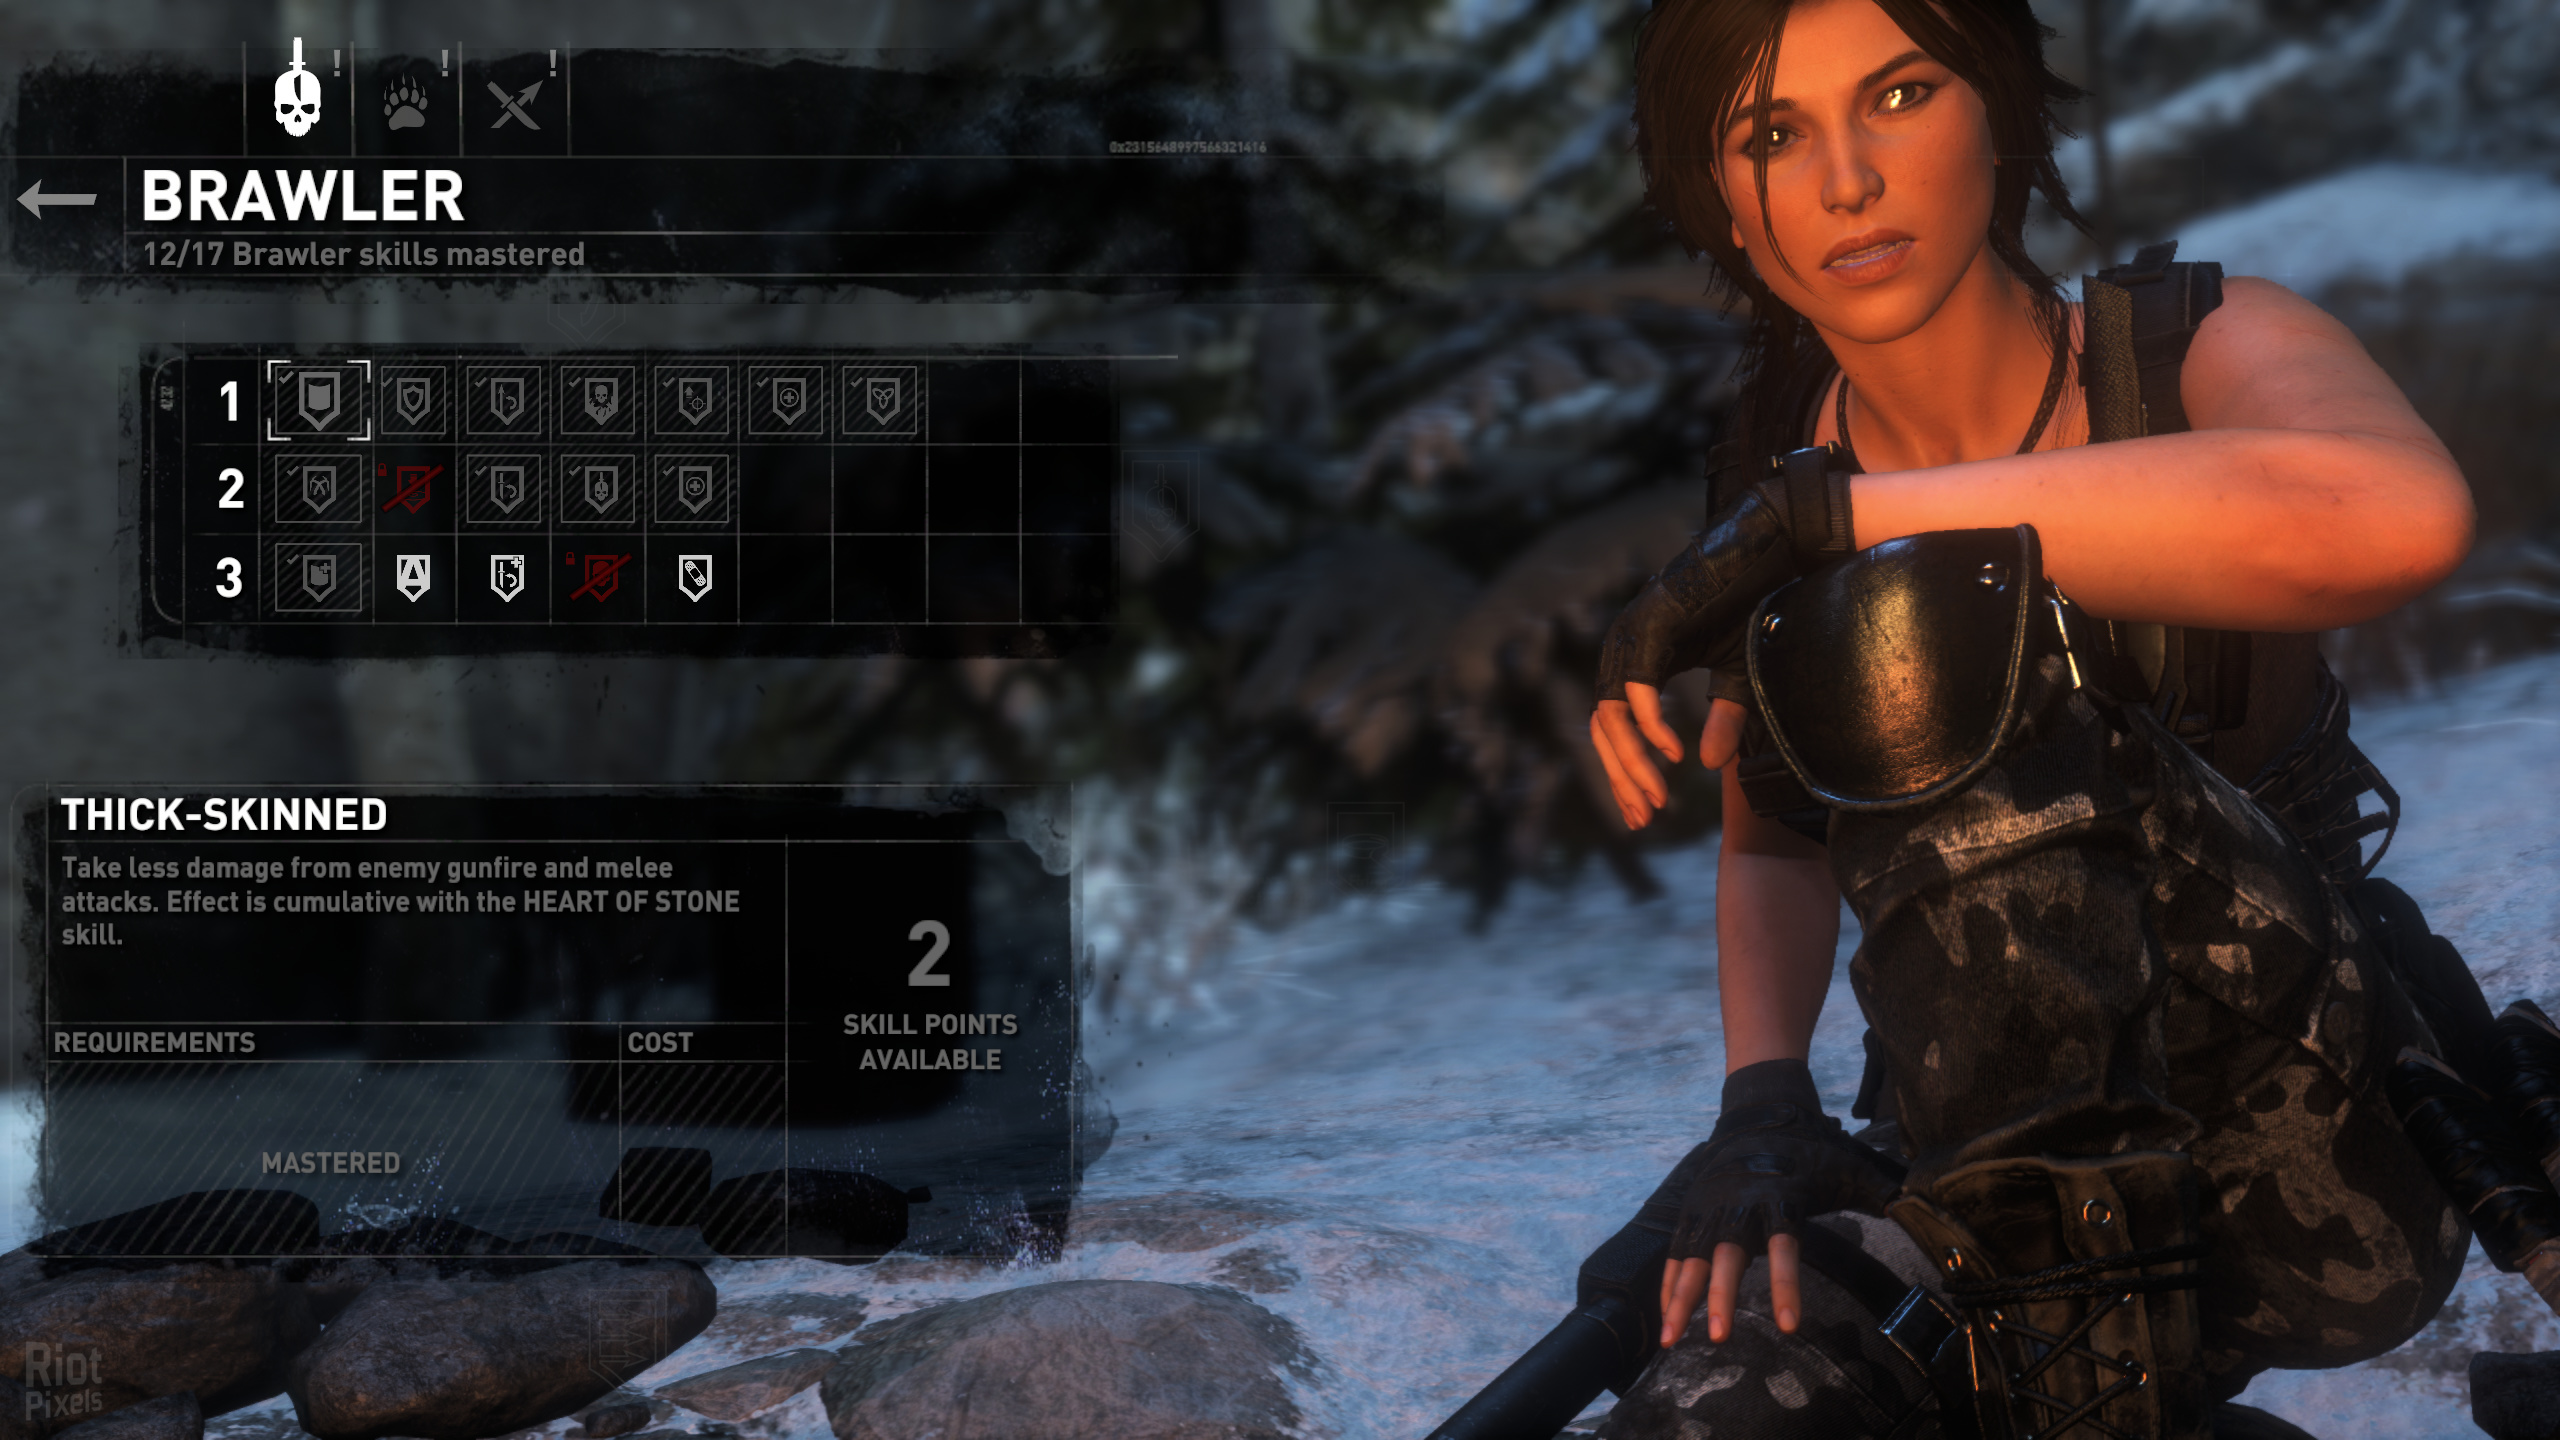 Rise of the Tomb Raider - game screenshots at Riot Pixels, images